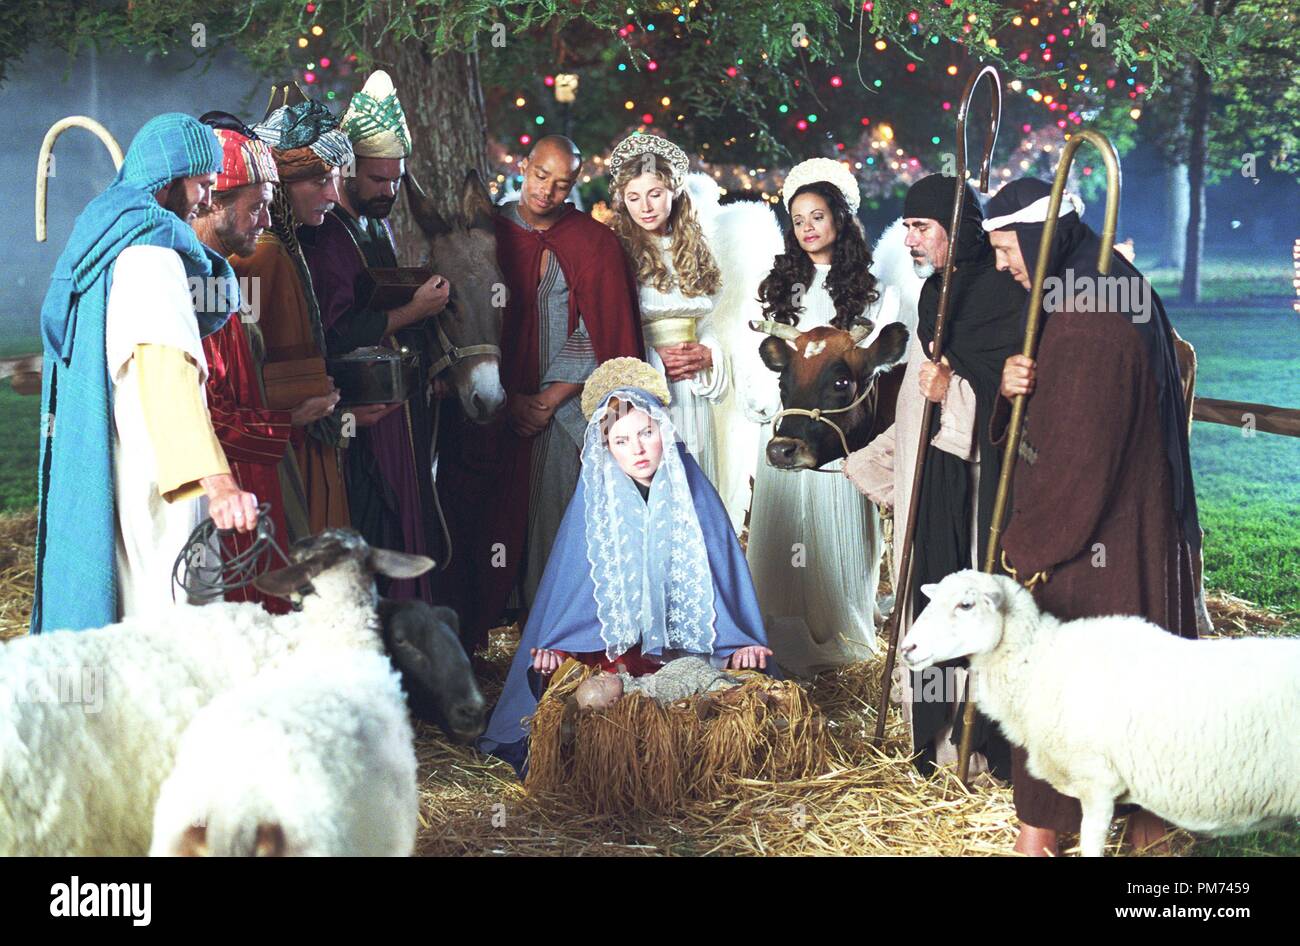 Film Still / Publicity Still from 'Scrubs' Episode: 'My Own Personal Jesus' Donald Faison, Granger Green, Sarah Chalke, Judy Reyes December 11, 2001 Photo: Scott Humbert File Reference # 30847413THA  For Editorial Use Only -  All Rights Reserved Stock Photo